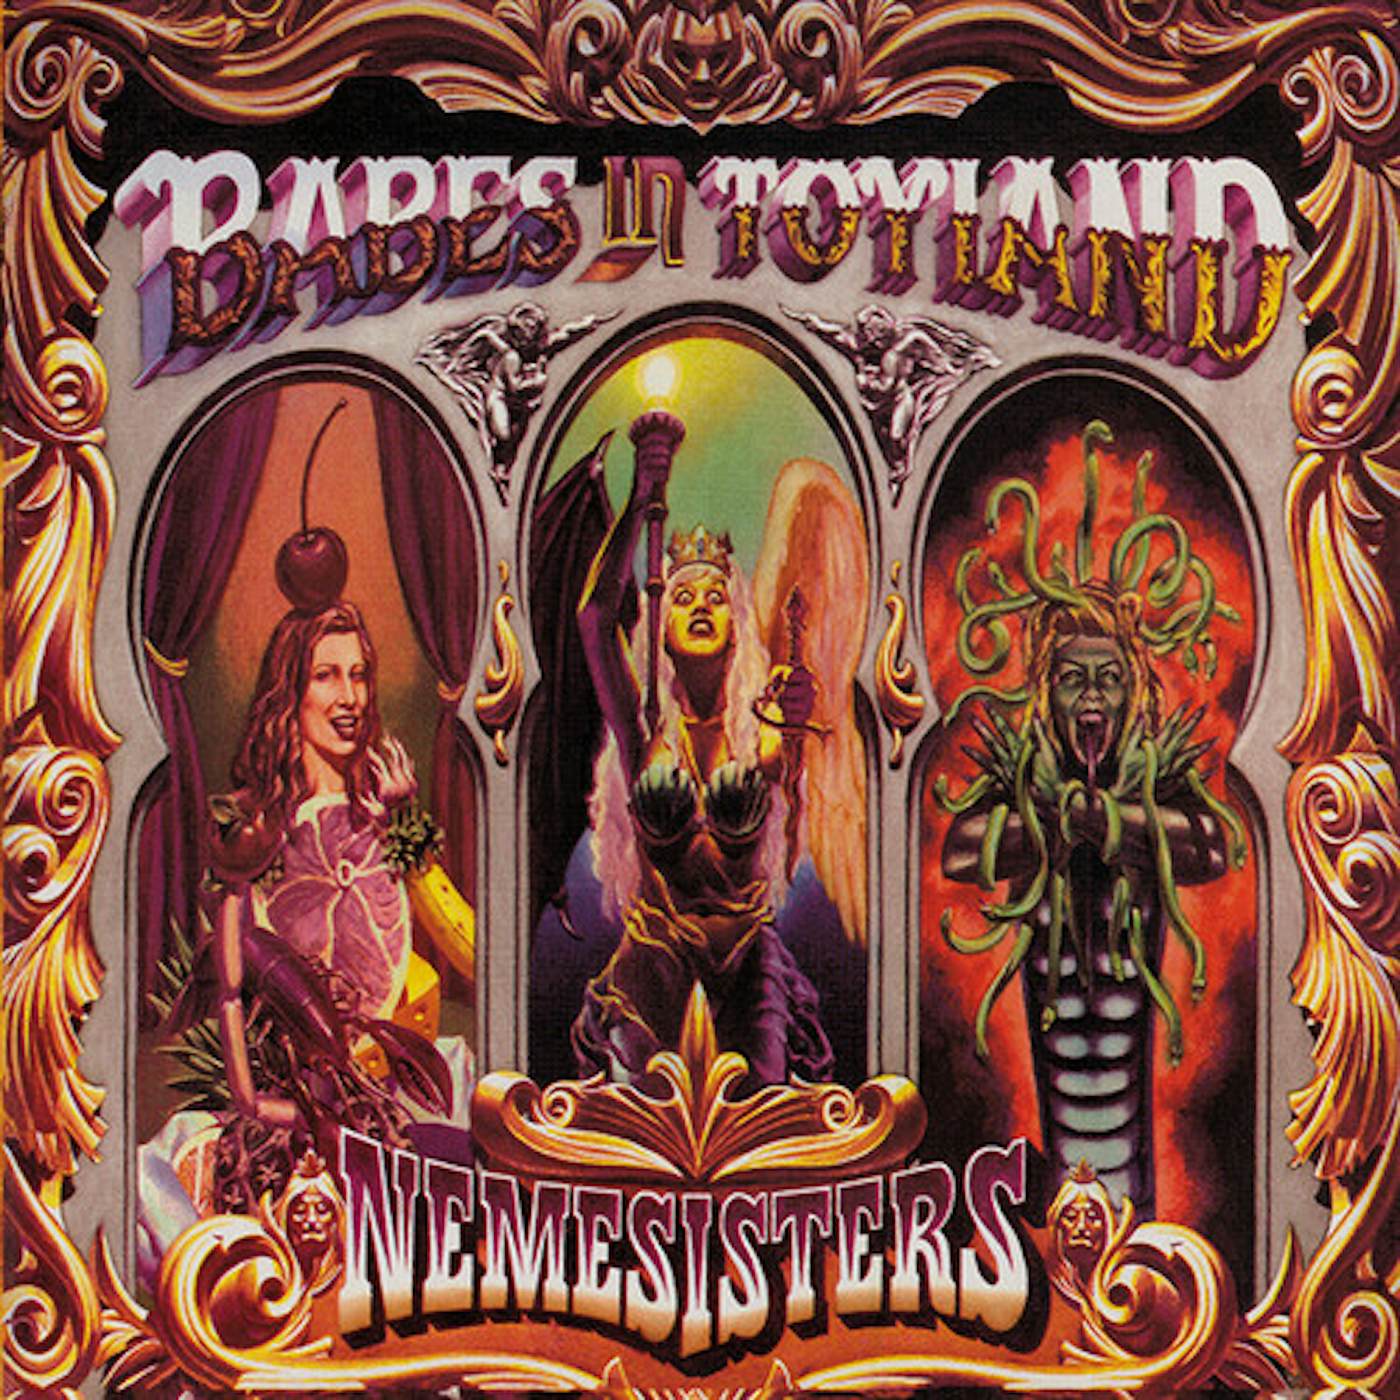 Babes In Toyland  NEMESISTERS CD